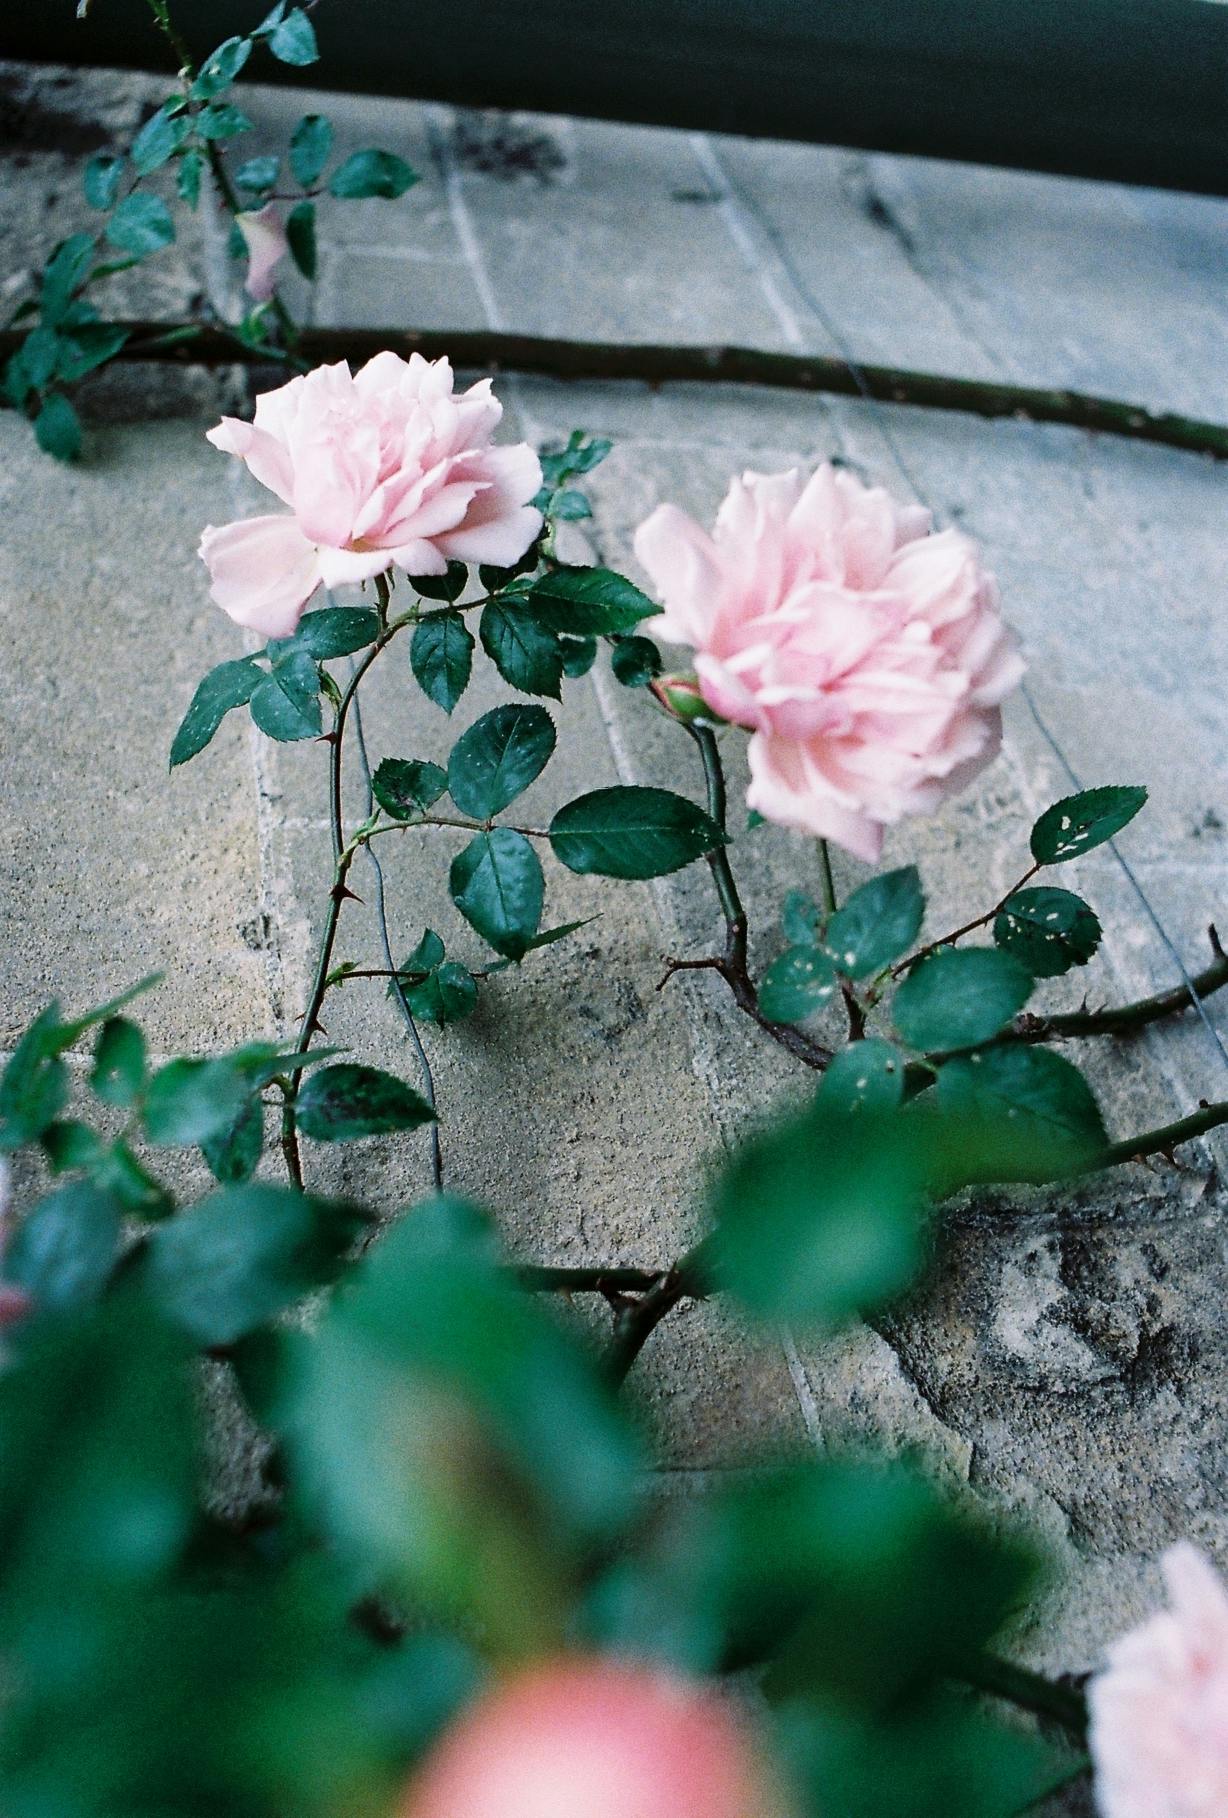 small pink roses in between green leaves on a stone sidewalk